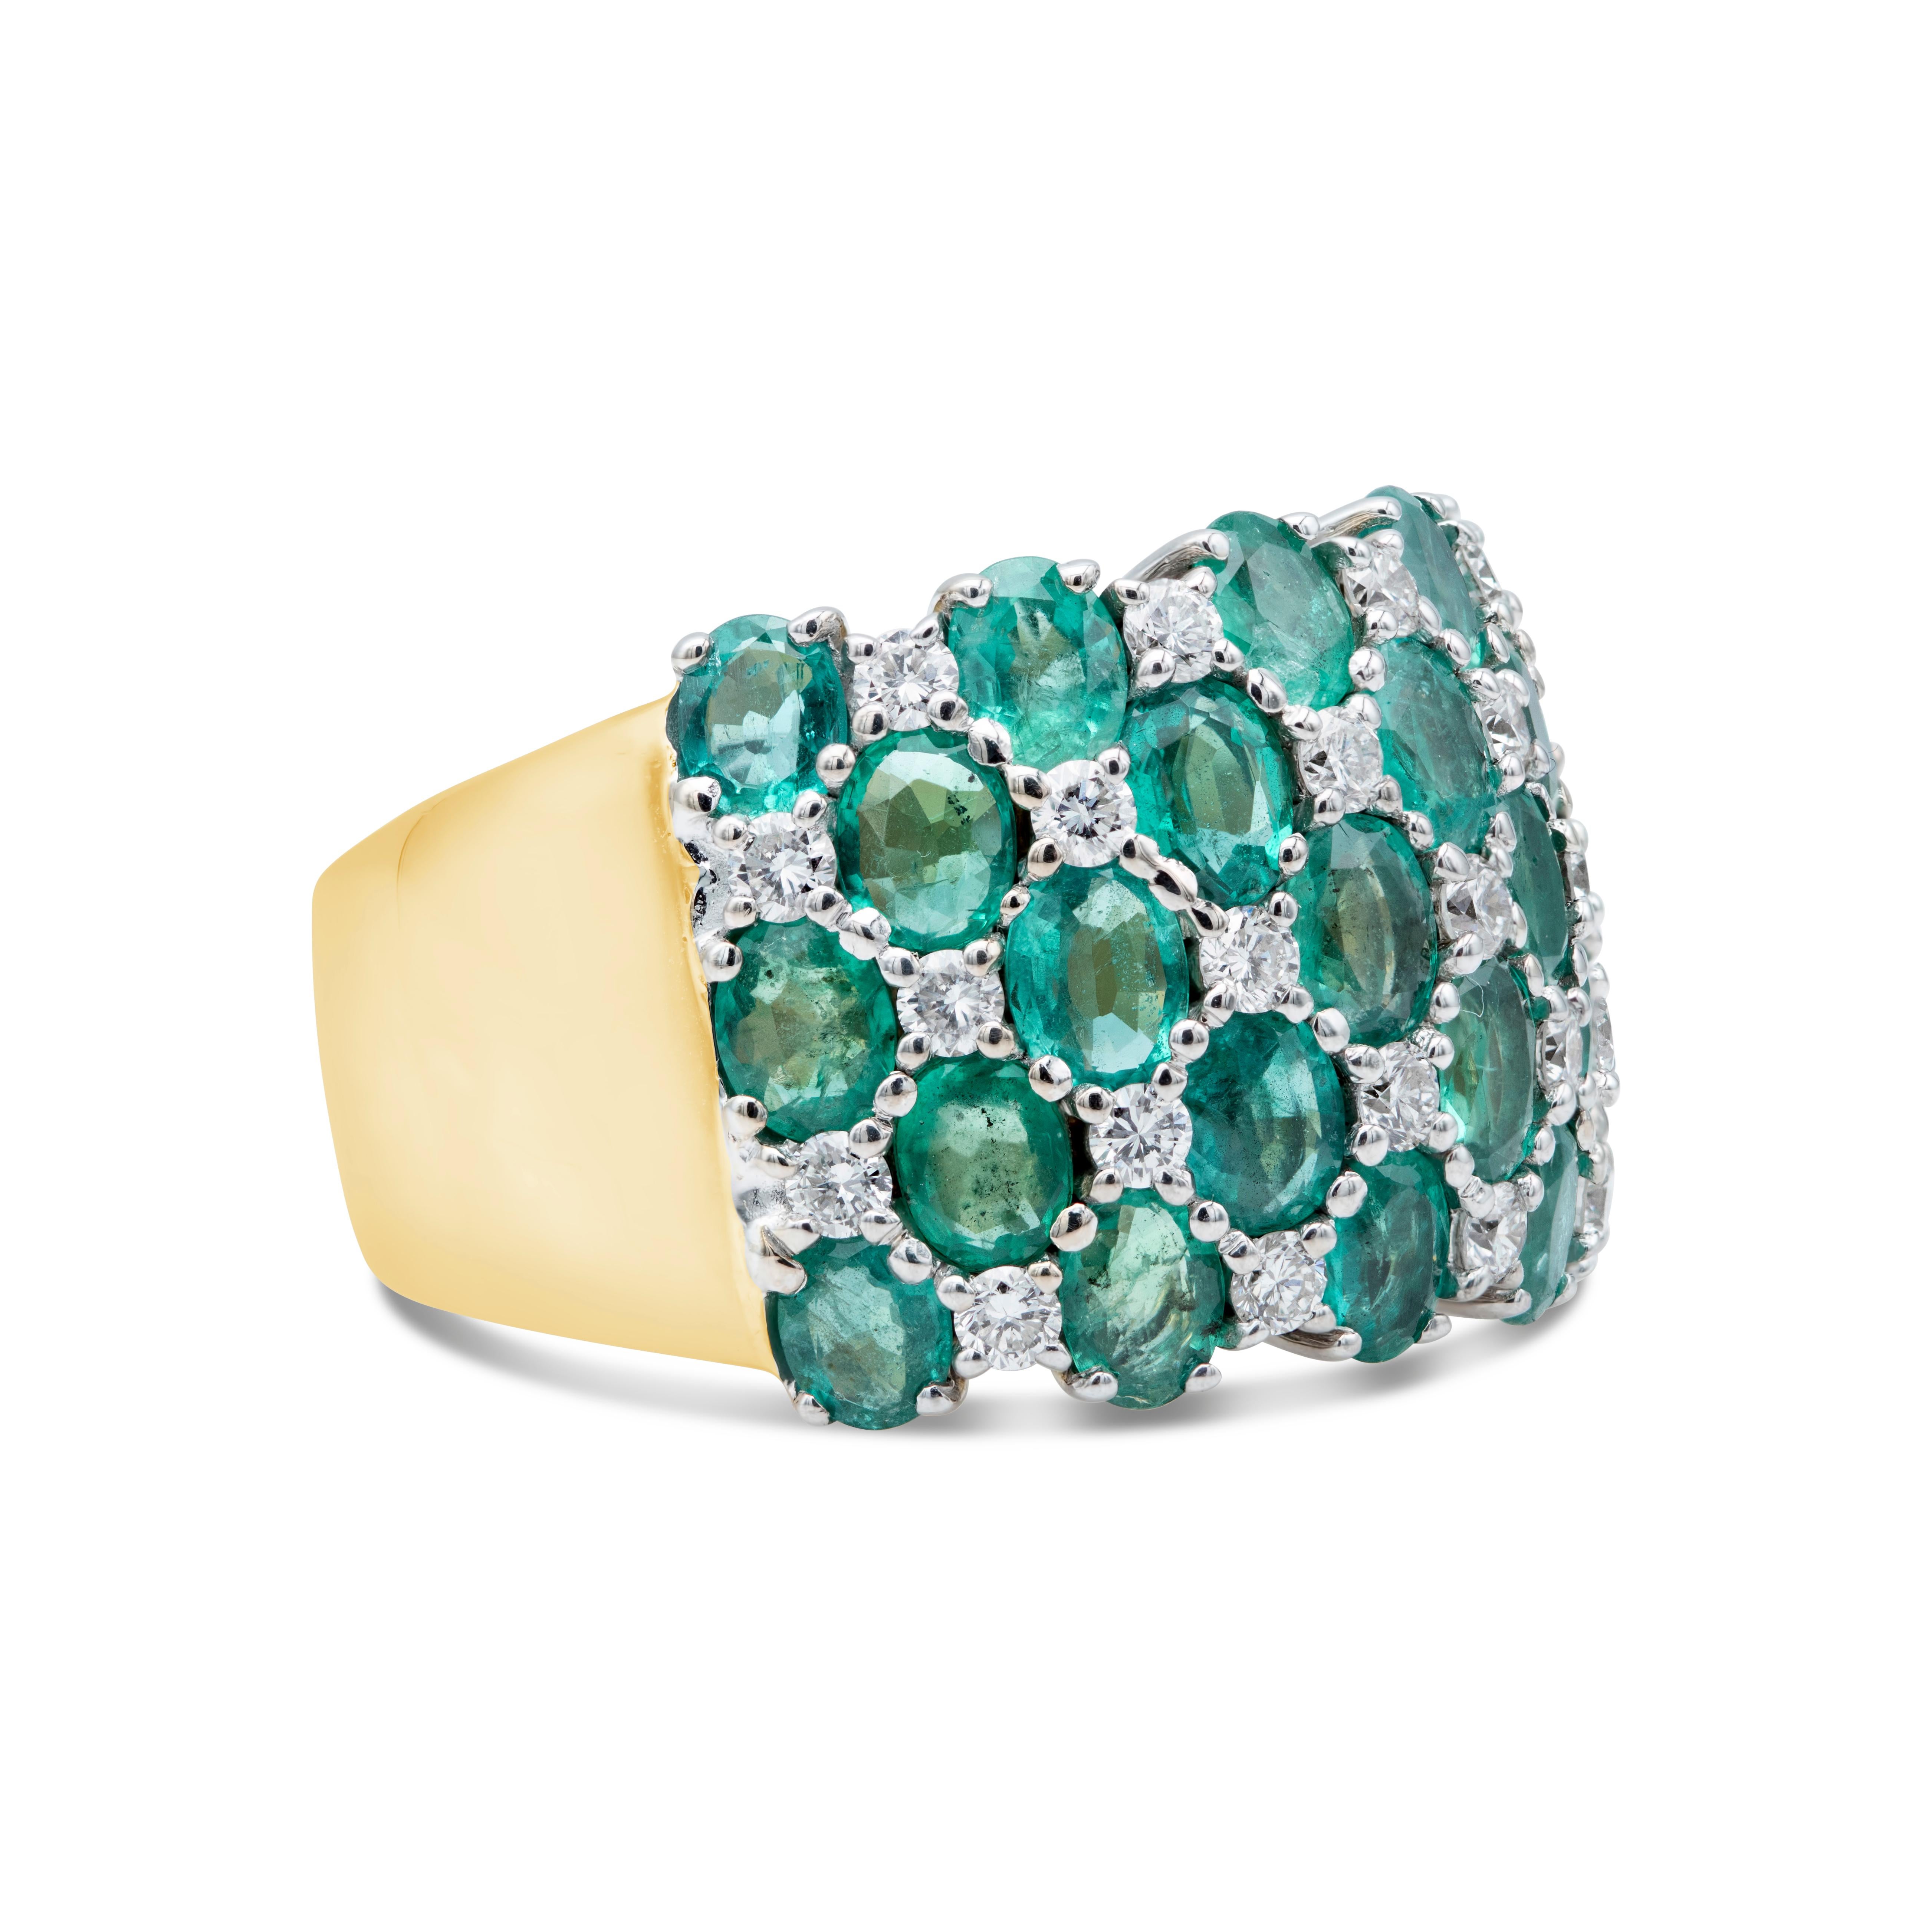 A chic and beautiful fashion ring features a cluster of oval cut green emeralds weighing 4.50 carats total. Accented with brilliant round diamonds weighing 0.55 carats. Made in 18K White and Yellow Gold. Size 9 US.

Style available in different